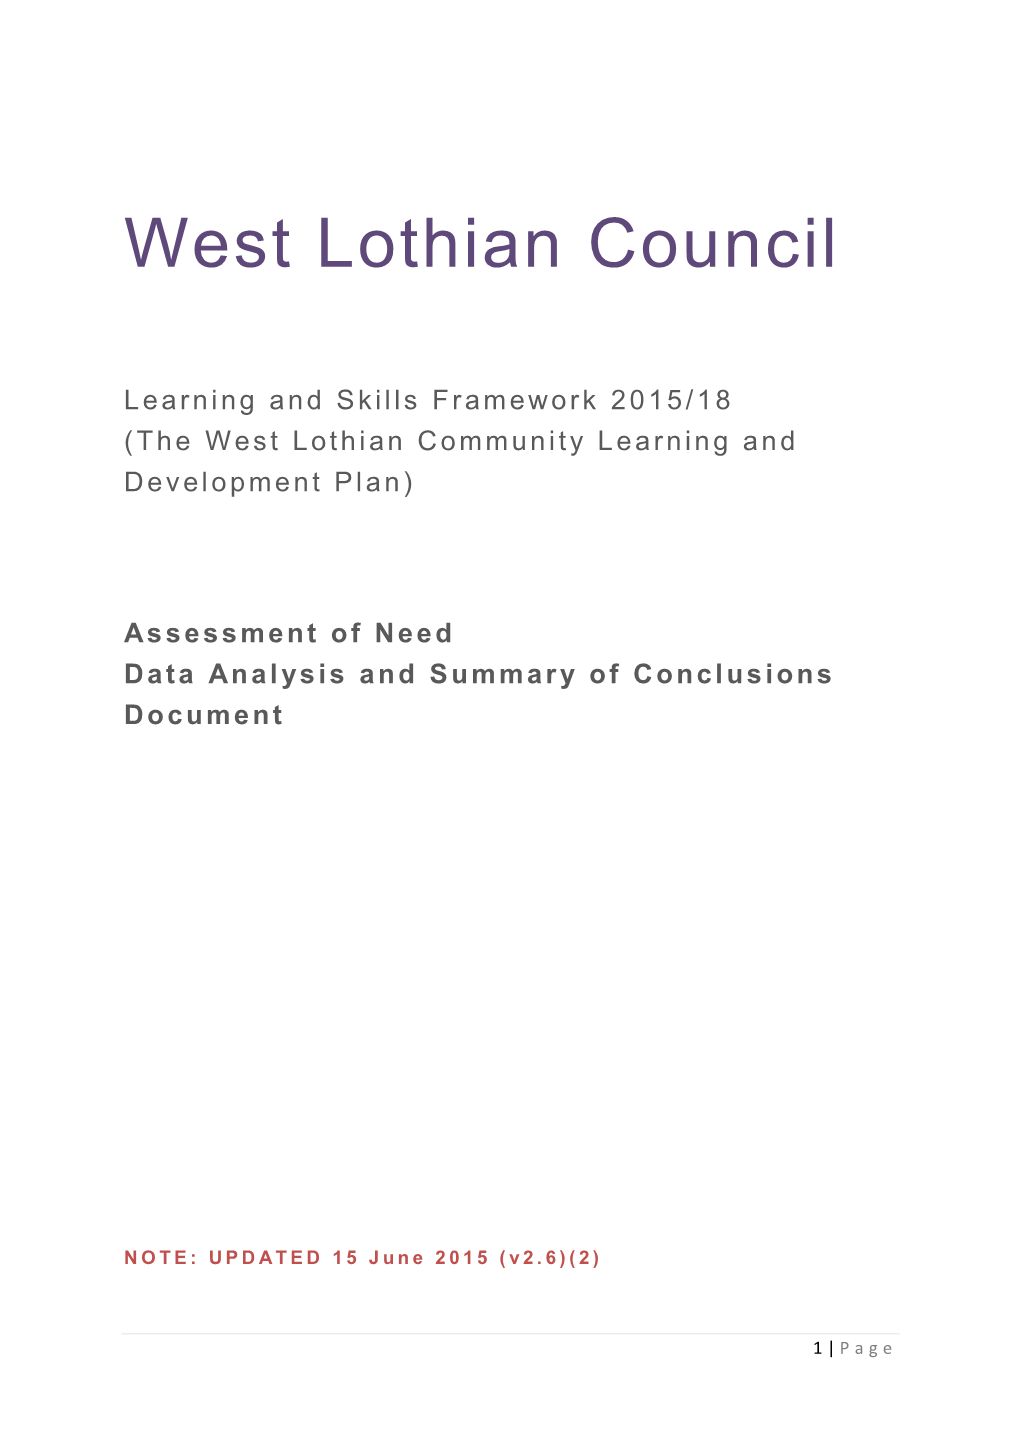 Learning and Skills Framework 2015/18 (The West Lothian Community Learning and Development Plan)